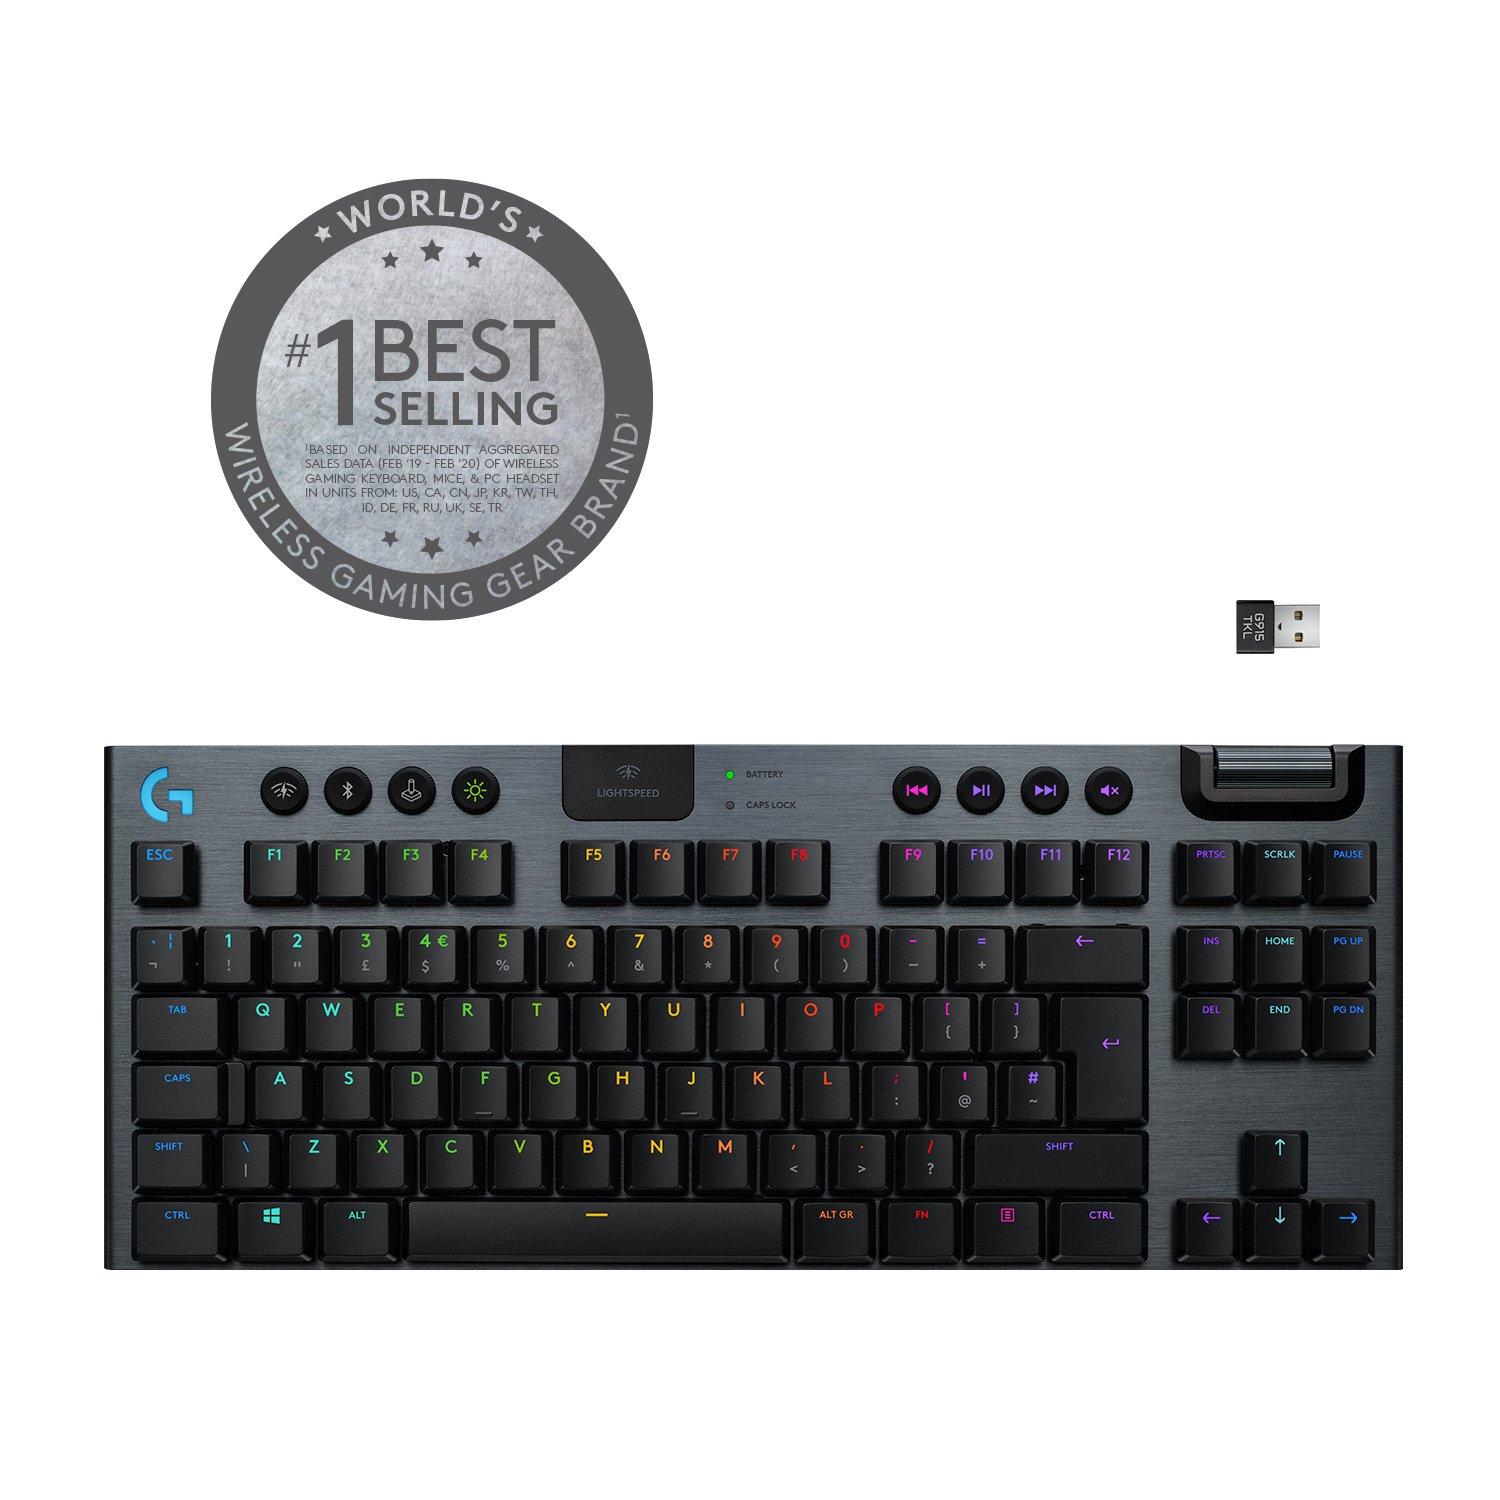 G915 TKL Wireless Clicky Switches Gaming Keyboard | GameStop